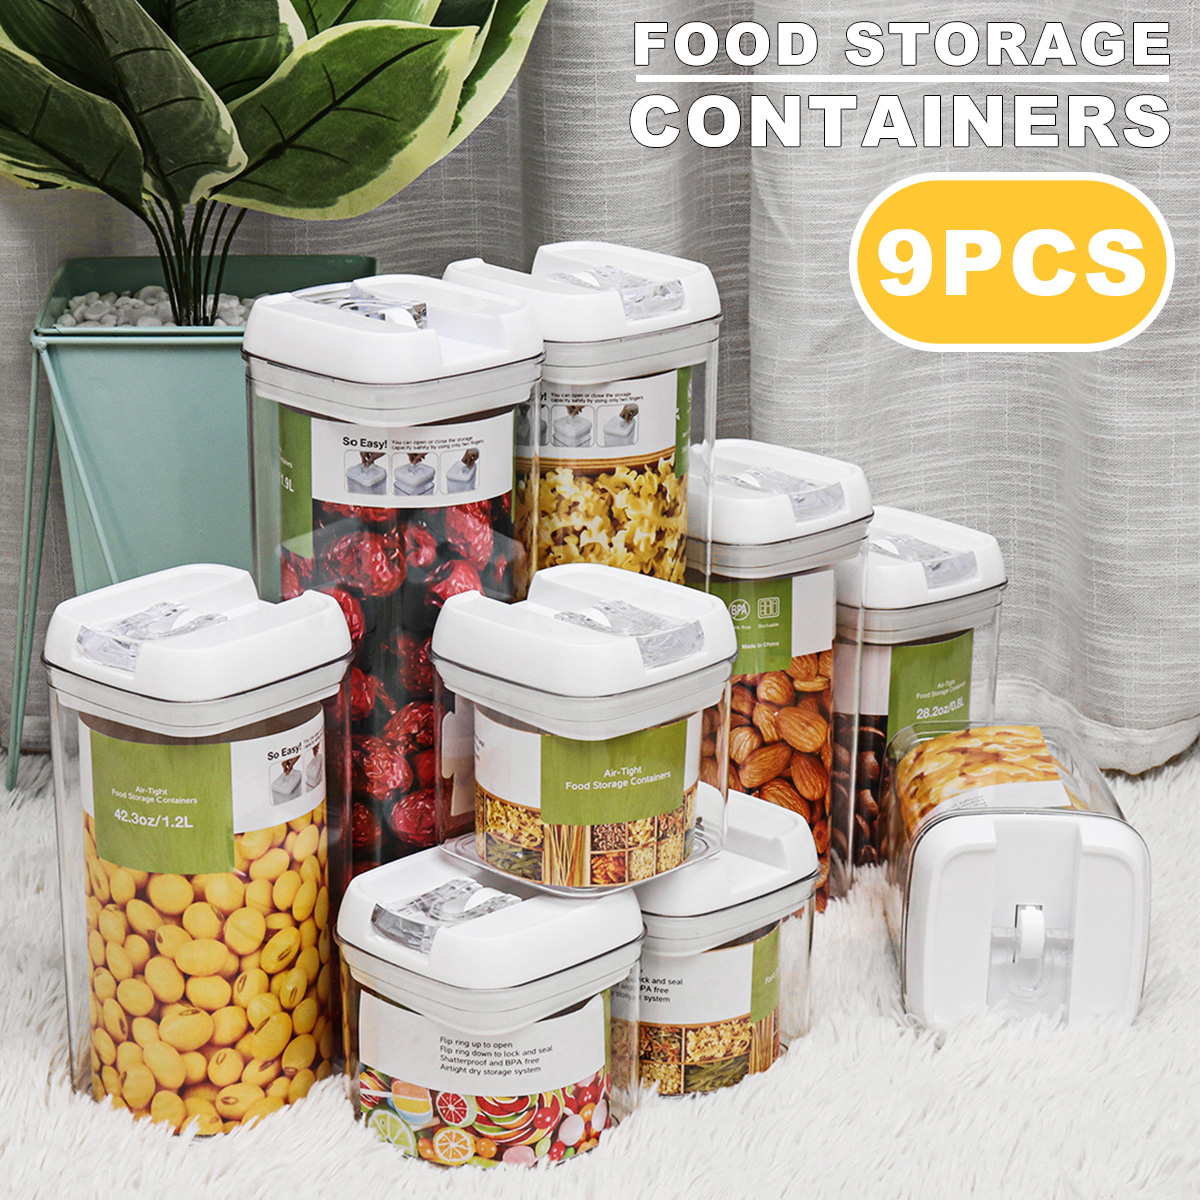 Airtight Food Storage Containers Square Nine-piece Easy-to-buckle Cans Kitchen Household Whole Grains Milk Powder Preservation Storage Tank